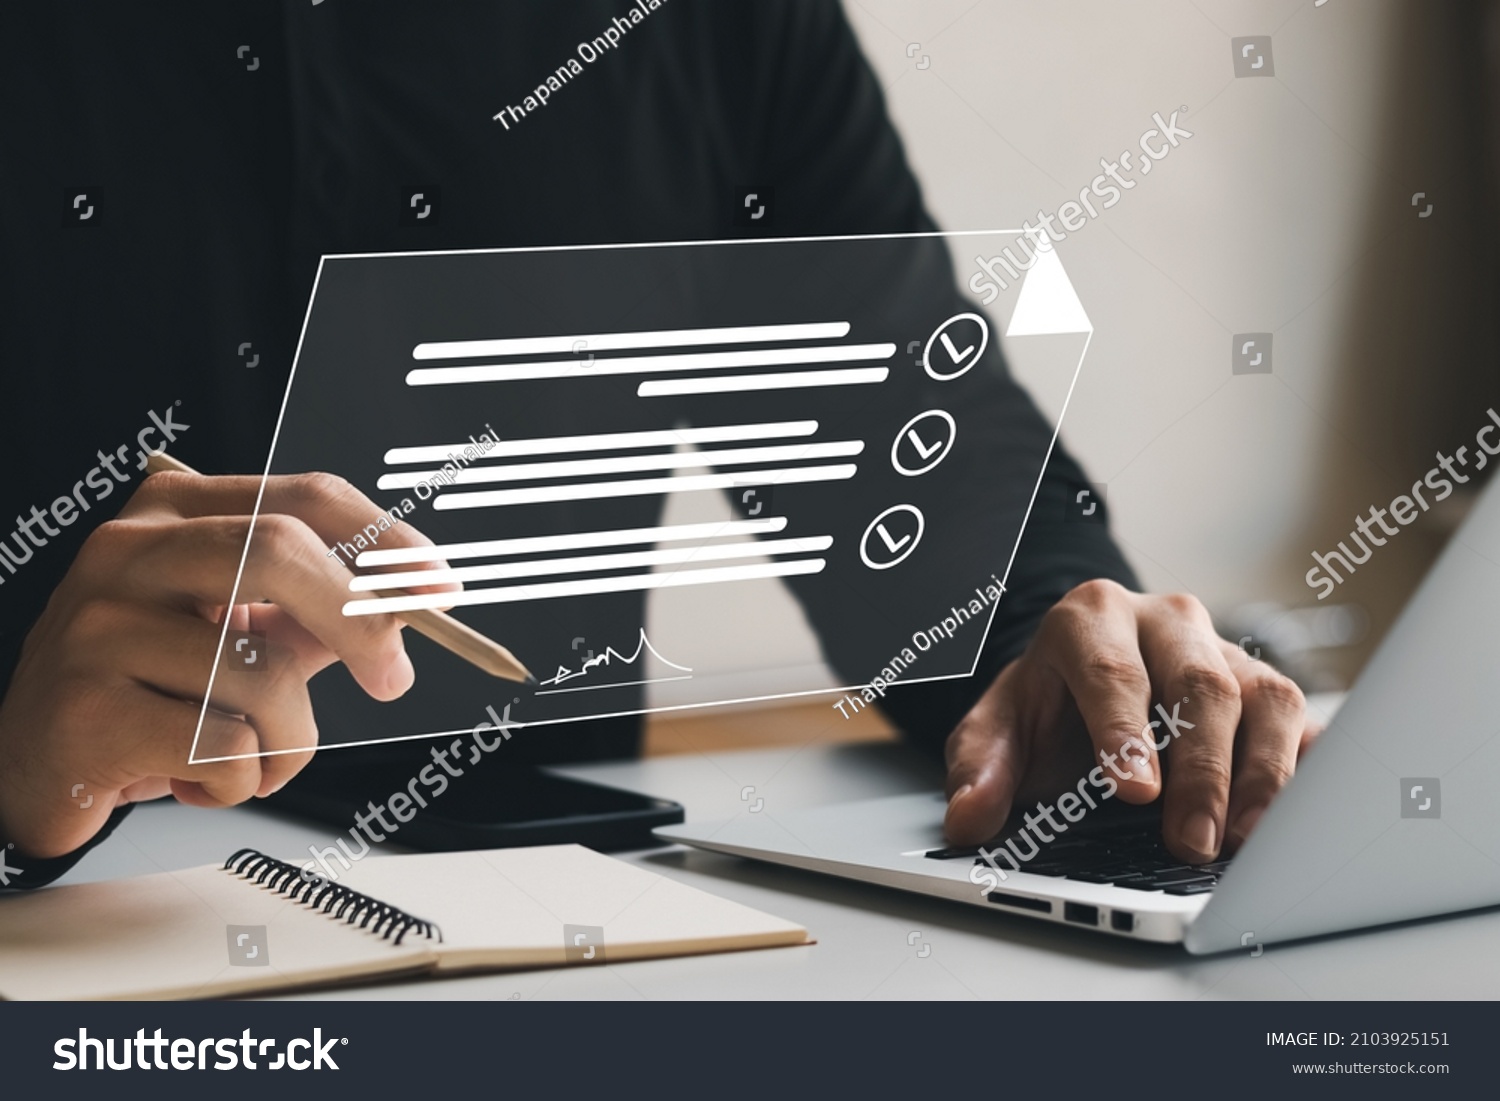 Electronic Signature Concept, Electronic Signing Businessman signs electronic documents on digital documents on virtual laptop screen using stylus pen. #2103925151